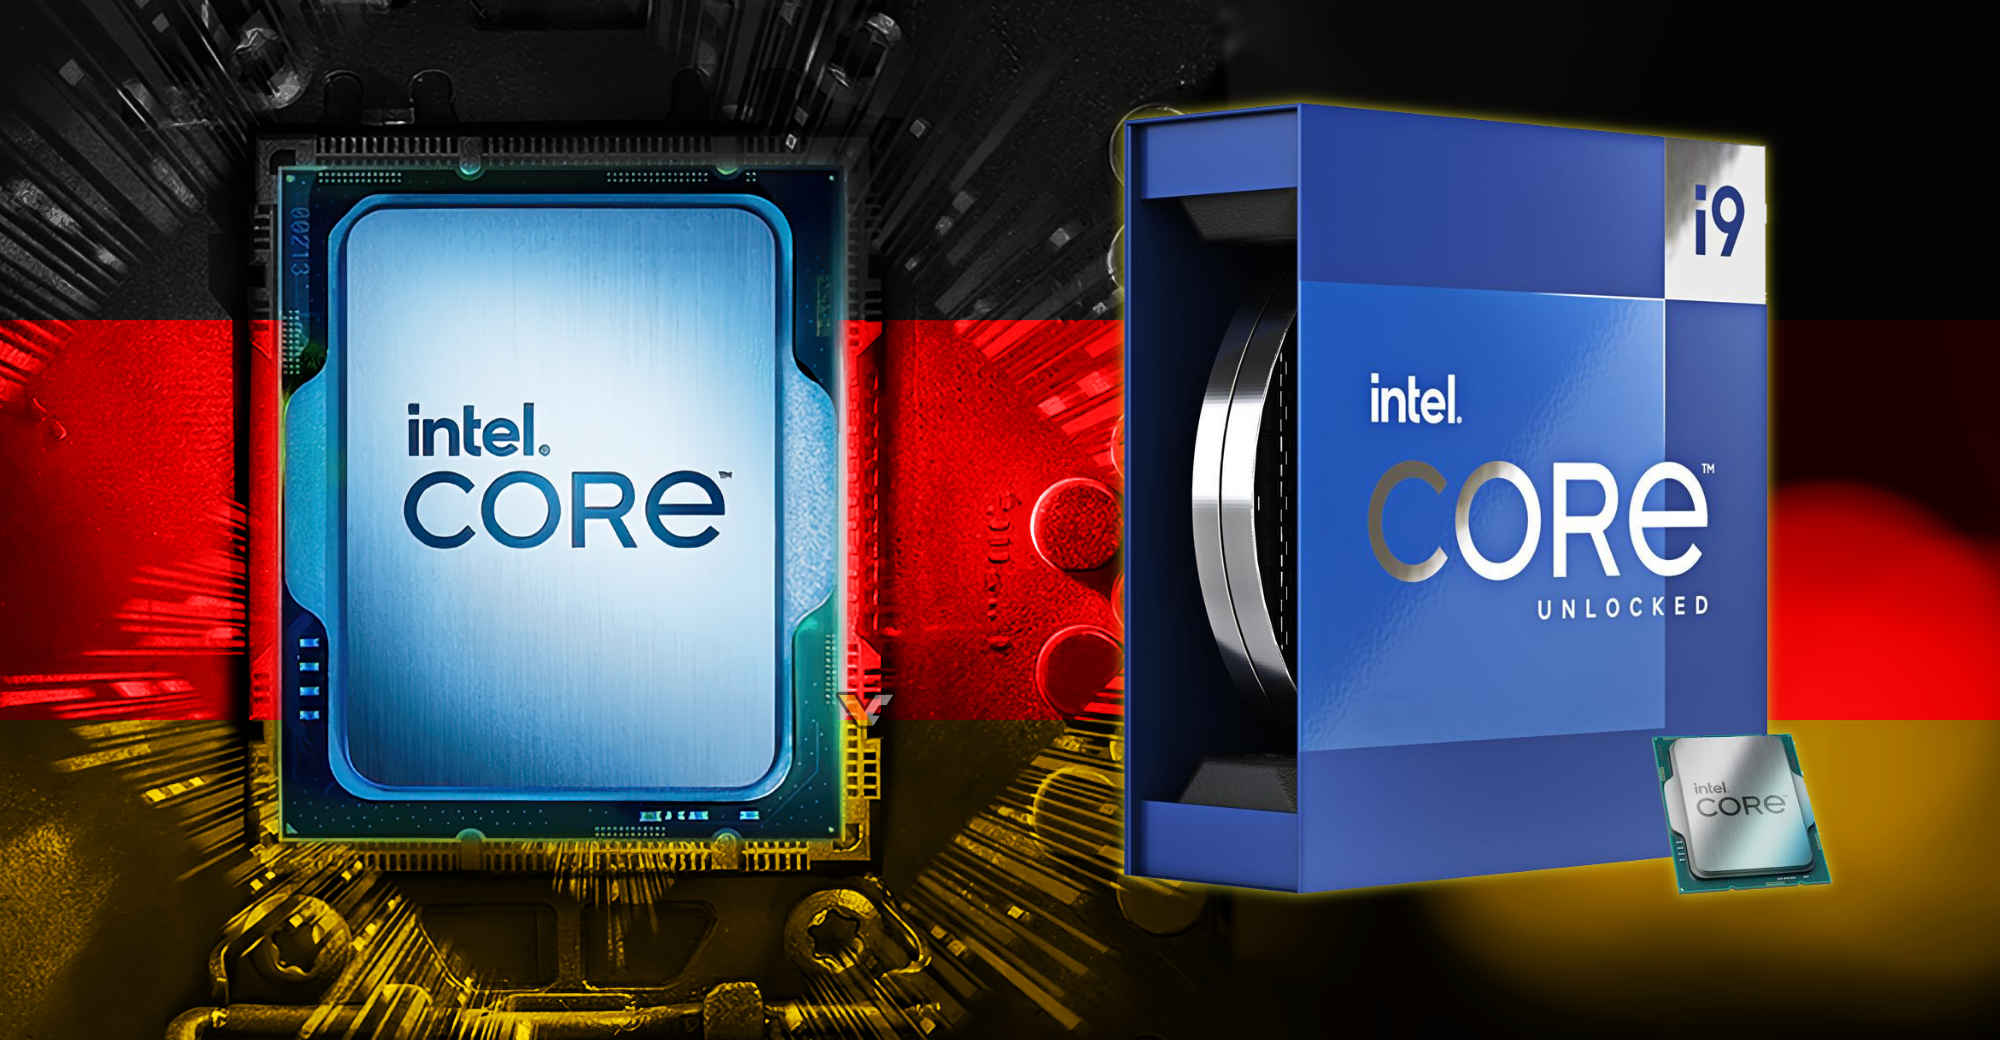 Intel Core i9 14900K review - is it worth it? - PC Guide